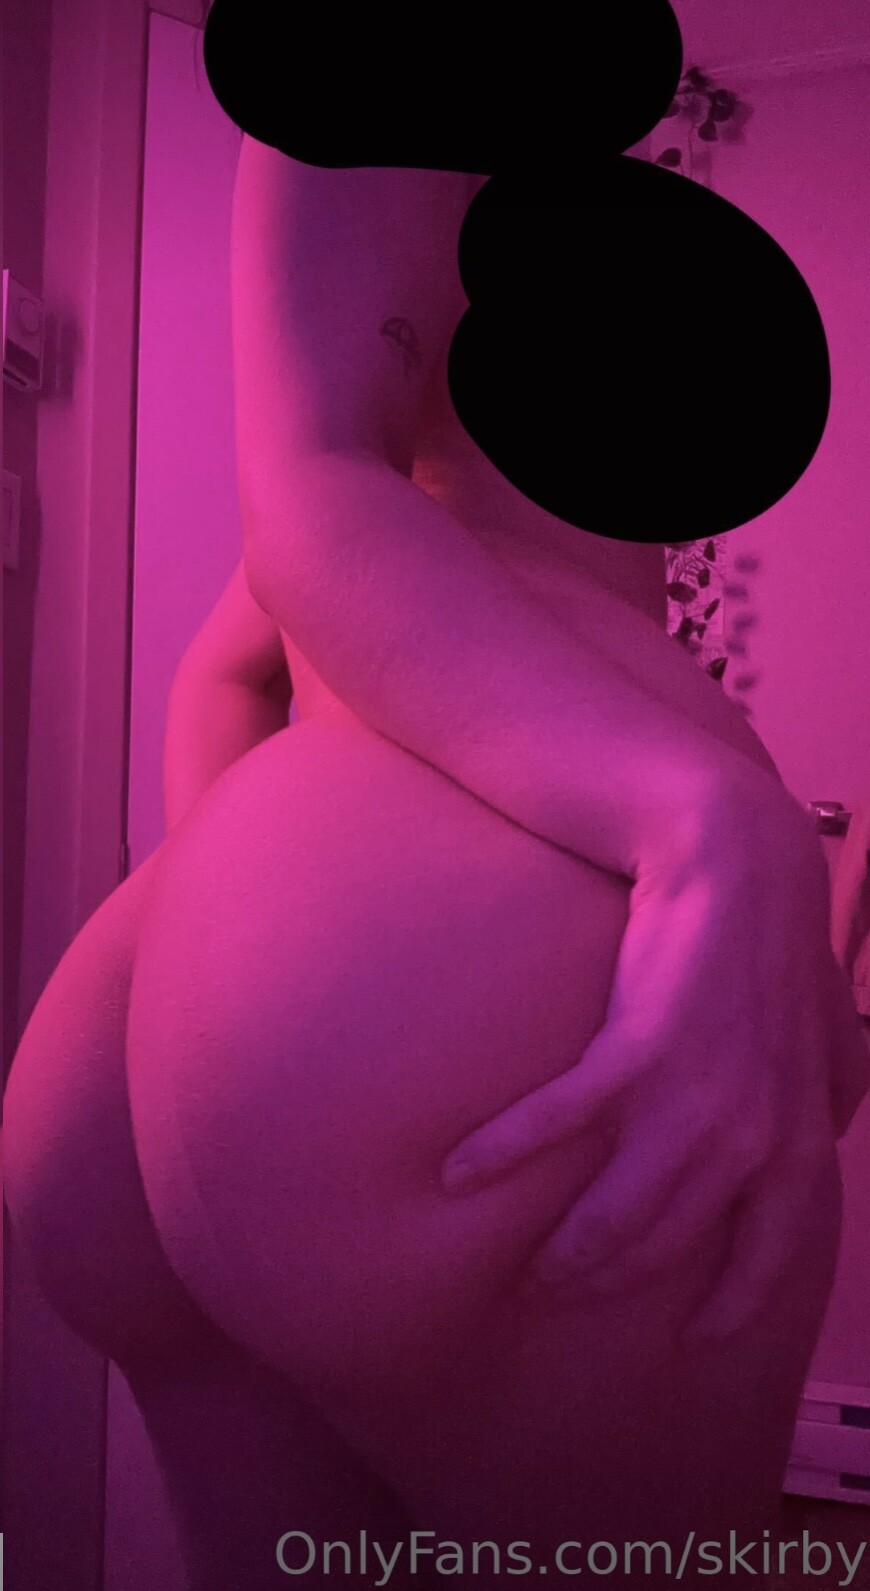 skirby onlyfans leak sexy lingerie imskirby ass photos and video ededdcb